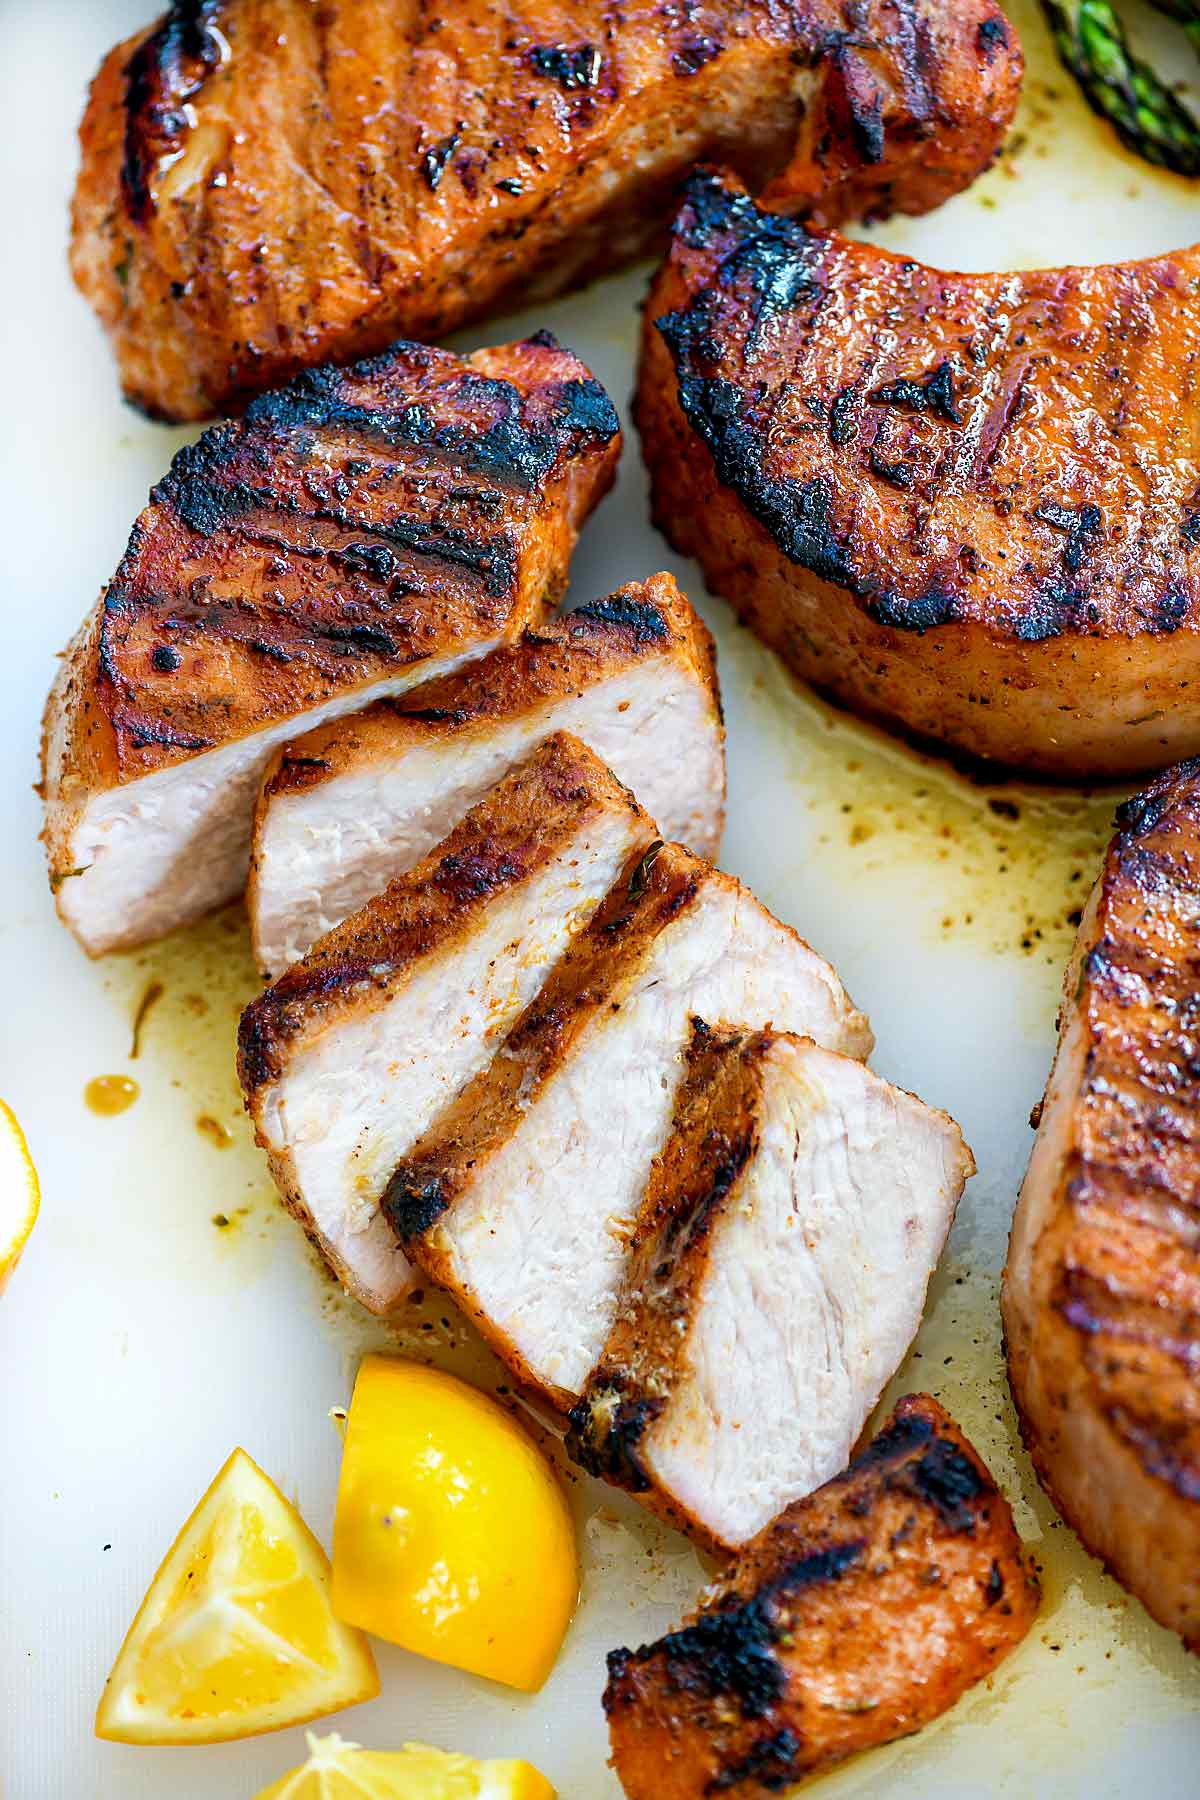 The Best Juicy Grilled Pork Chops Foodiecrush Com,Mimosa Recipes With Vodka